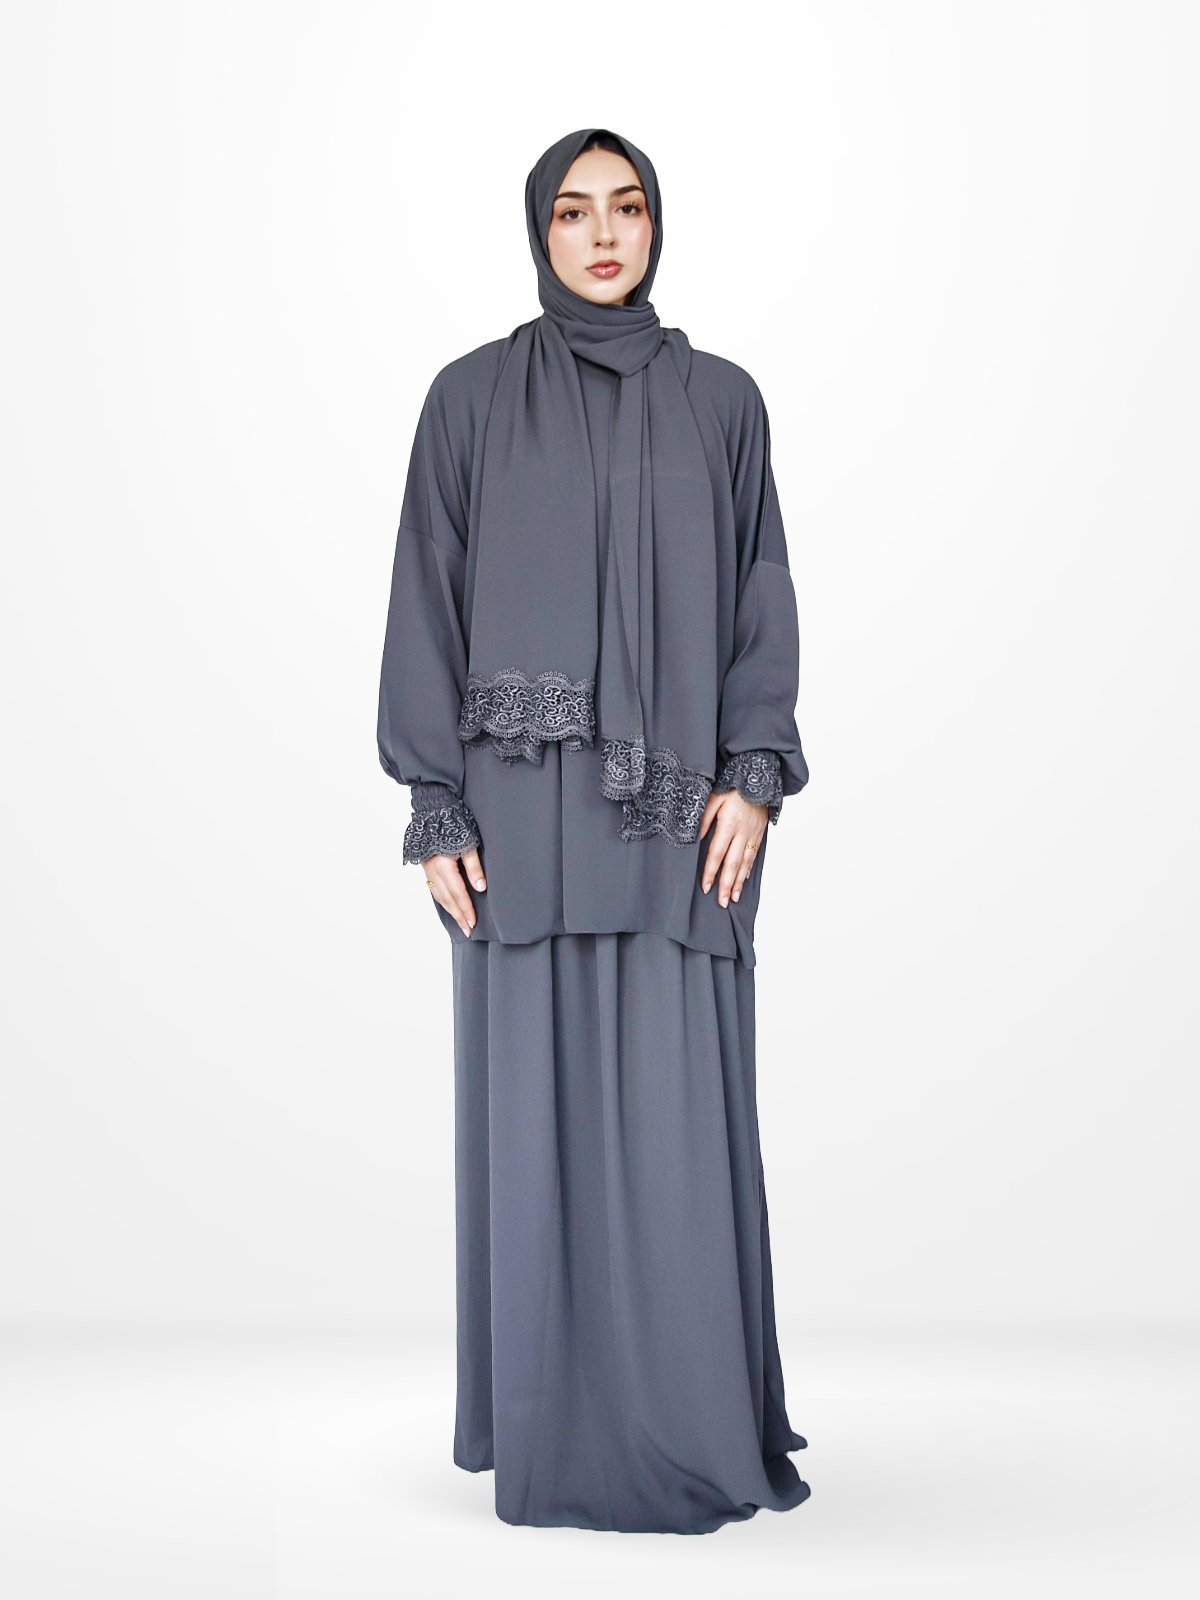 Two-Piece Prayer Dress & Abaya with attached Hijab - Crepe Fabric - Modest Essence